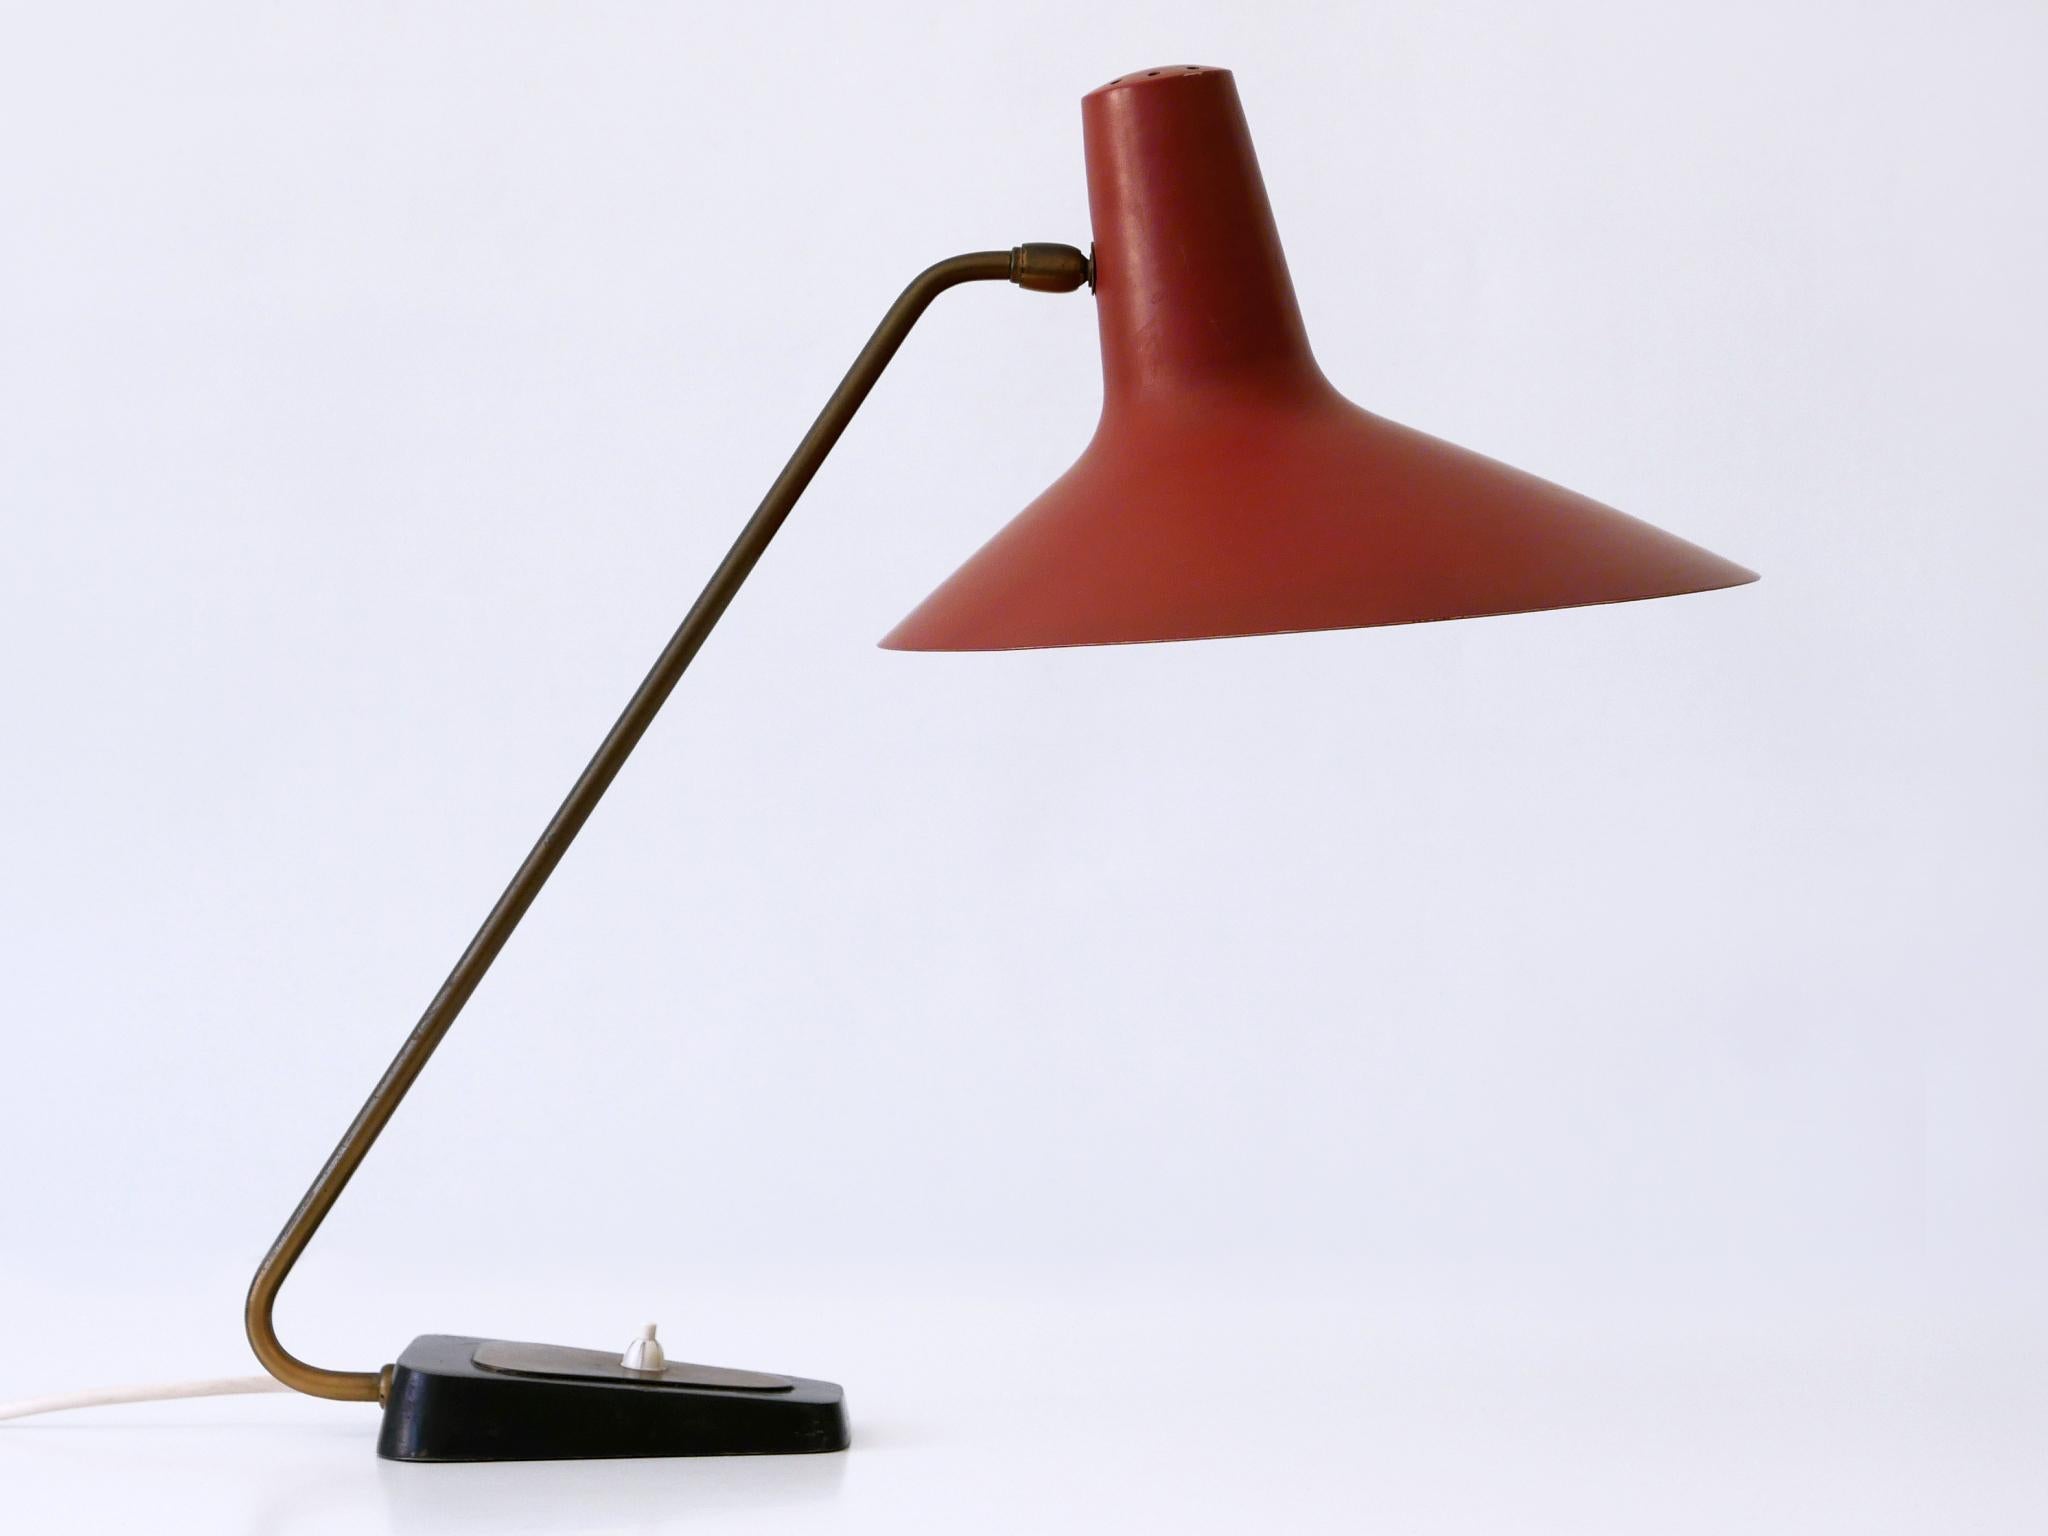 Aluminum Exceptional Mid-Century Modern Table Lamp by Gebrüder Cosack Germany 1950s For Sale